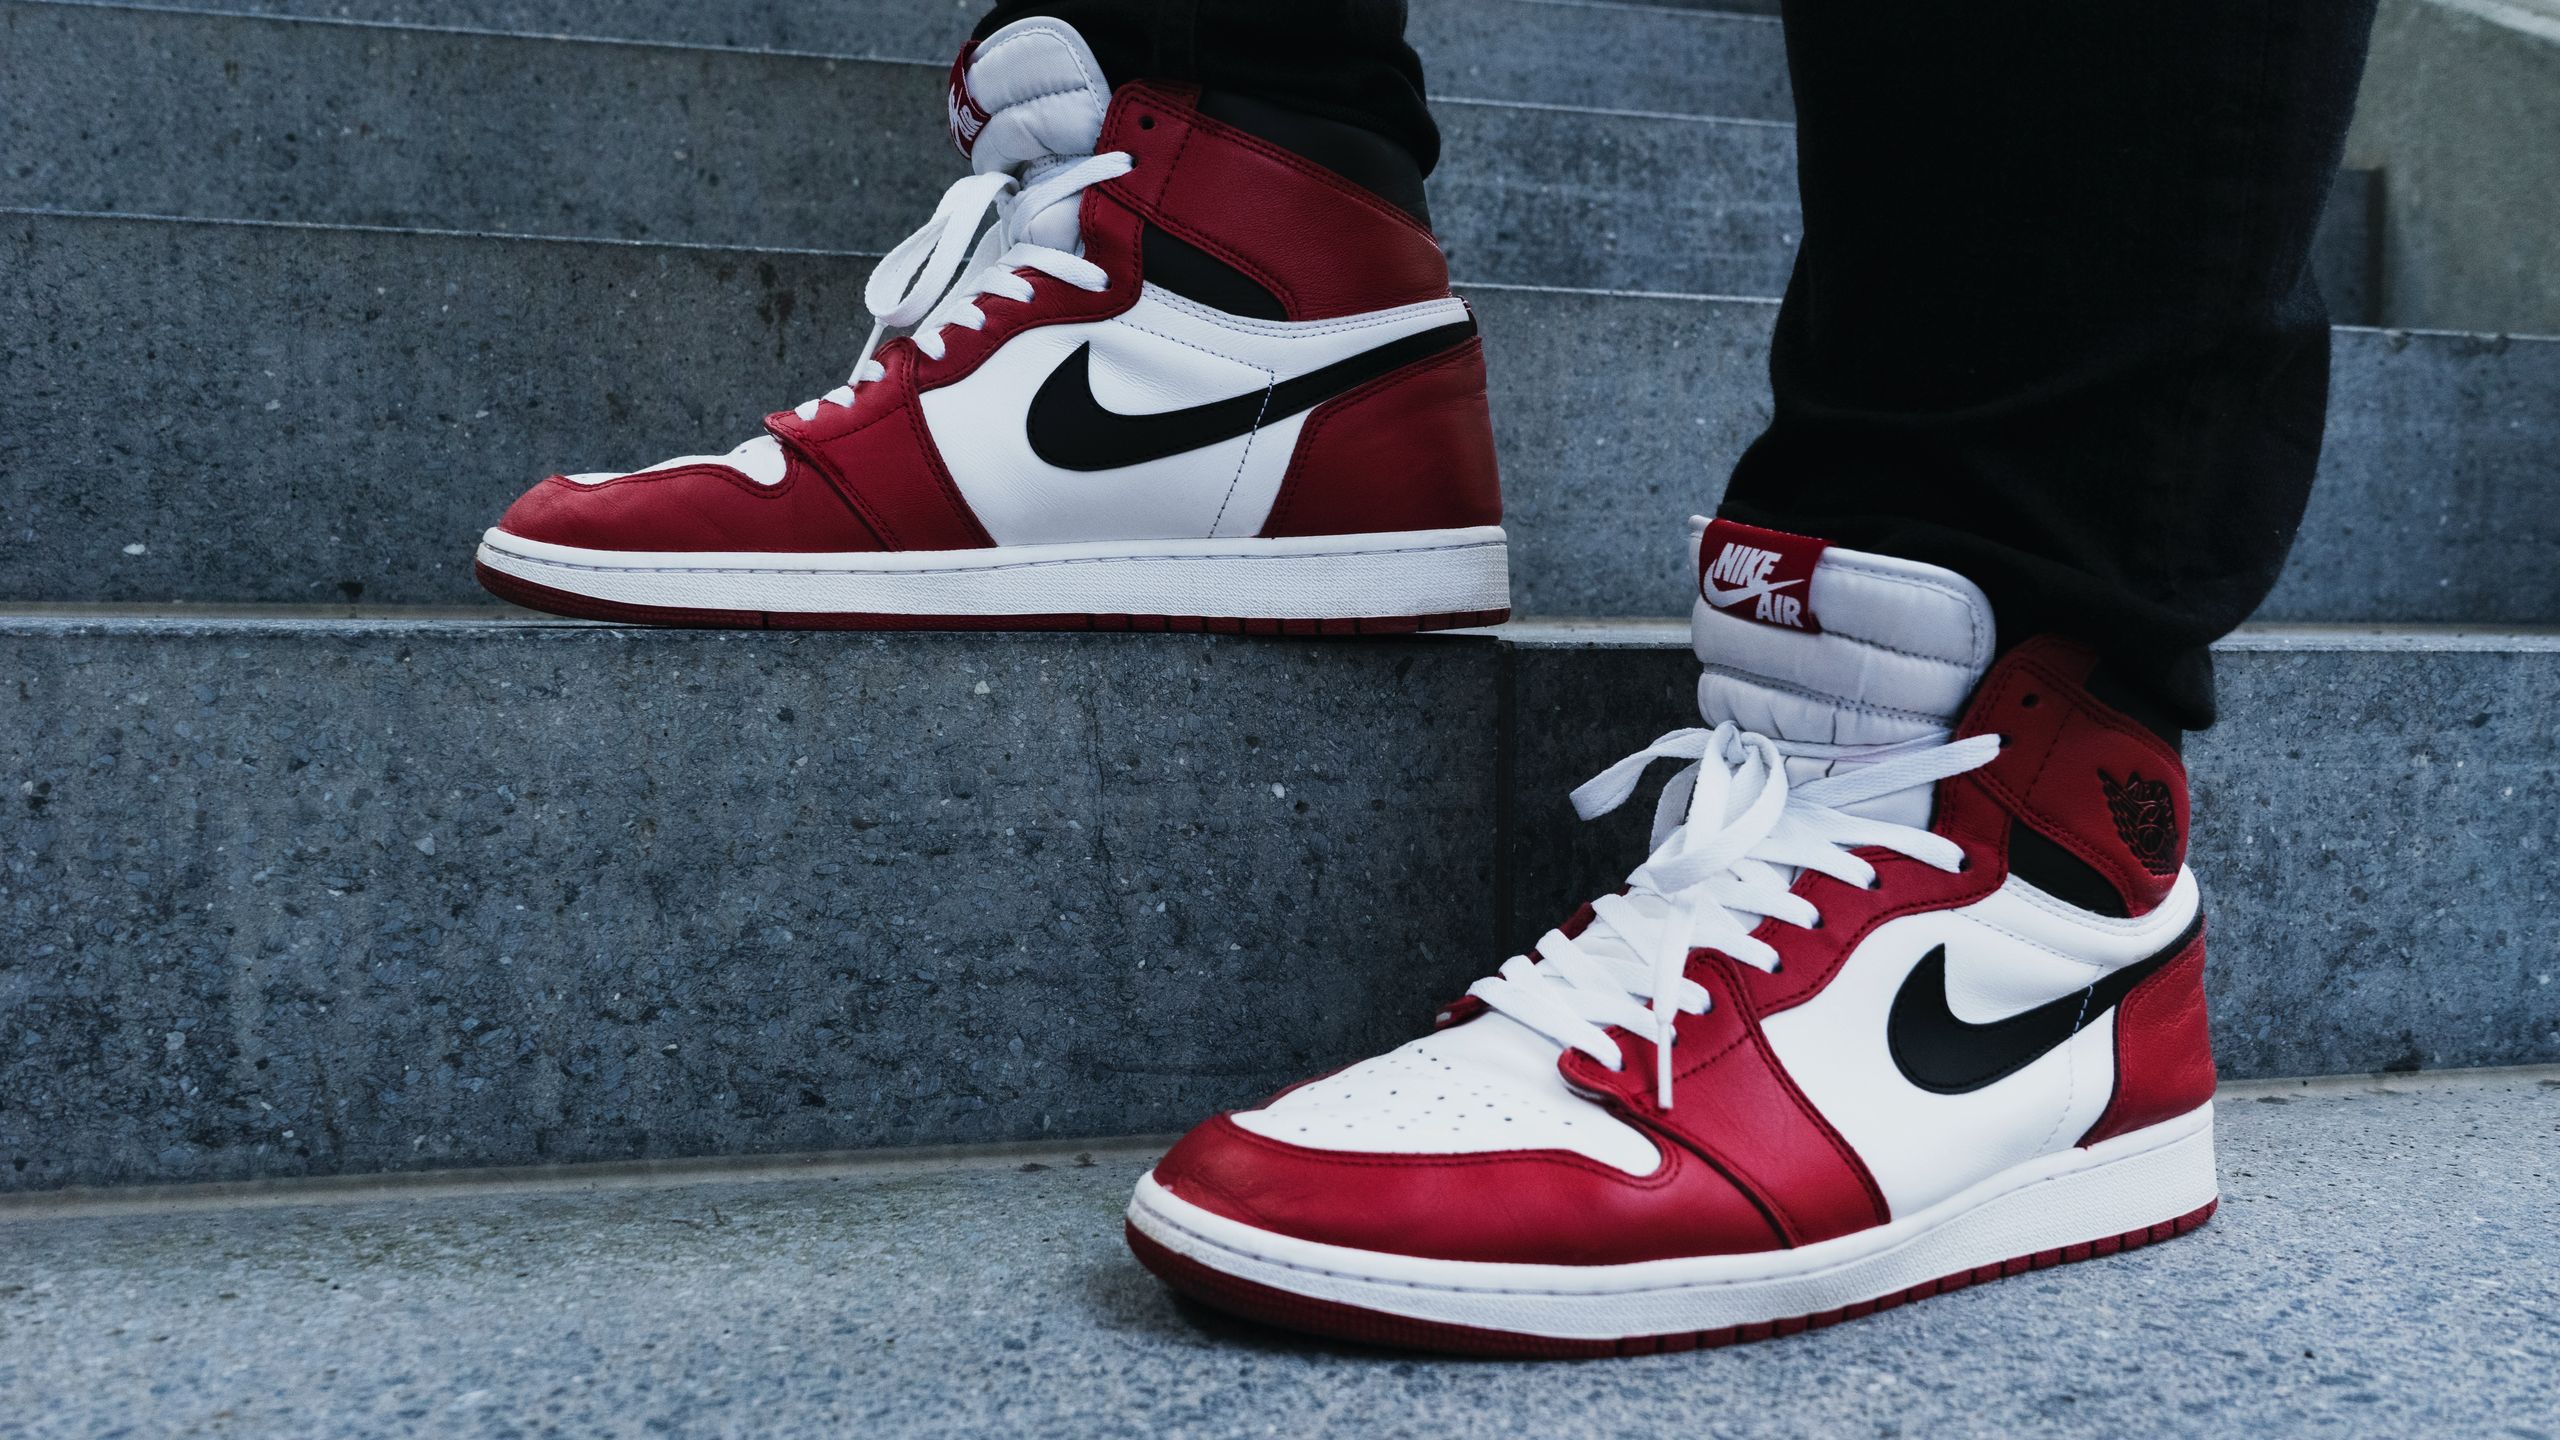 a person is wearing a pair of red and white nike air jordan 1 sneakers .​​​​‌﻿‍﻿​‍​‍‌‍﻿﻿‌﻿​‍‌‍‍‌‌‍‌﻿‌‍‍‌‌‍﻿‍​‍​‍​﻿‍‍​‍​‍‌﻿​﻿‌‍​‌‌‍﻿‍‌‍‍‌‌﻿‌​‌﻿‍‌​‍﻿‍‌‍‍‌‌‍﻿﻿​‍​‍​‍﻿​​‍​‍‌‍‍​‌﻿​‍‌‍‌‌‌‍‌‍​‍​‍​﻿‍‍​‍​‍‌‍‍​‌﻿‌​‌﻿‌​‌﻿​​​﻿‍‍​‍﻿﻿​‍﻿﻿‌‍﻿​‌‍﻿﻿‌‍​﻿‌‍​‌‌‍﻿​‌‍‍​‌‍﻿﻿‌﻿​﻿‌﻿‌​​﻿‍‍​﻿​﻿​﻿​﻿​﻿​﻿​﻿​﻿​‍﻿﻿‌‍‍‌‌‍﻿‍‌﻿‌​‌‍‌‌‌‍﻿‍‌﻿‌​​‍﻿﻿‌‍‌‌‌‍‌​‌‍‍‌‌﻿‌​​‍﻿﻿‌‍﻿‌‌‍﻿﻿‌‍‌​‌‍‌‌​﻿﻿‌‌﻿​​‌﻿​‍‌‍‌‌‌﻿​﻿‌‍‌‌‌‍﻿‍‌﻿‌​‌‍​‌‌﻿‌​‌‍‍‌‌‍﻿﻿‌‍﻿‍​﻿‍﻿‌‍‍‌‌‍‌​​﻿﻿‌​﻿‌‍‌‍‌‌​﻿‌﻿‌‍​‌‌‍‌‍​﻿​‌​﻿‍​‌‍​﻿​‍﻿‌​﻿‌​‌‍‌​​﻿​‌​﻿​﻿​‍﻿‌​﻿‌​​﻿‌‌​﻿‌​​﻿‌​​‍﻿‌‌‍​‍​﻿‌​‌‍​‌‌‍‌‍​‍﻿‌​﻿‌‌​﻿​‍​﻿​‍‌‍​﻿‌‍​‌​﻿‌﻿​﻿‌‍​﻿‌‍​﻿‌‍​﻿​﻿‌‍‌​‌‍​‍​﻿‍﻿‌﻿‌​‌﻿‍‌‌﻿​​‌‍‌‌​﻿﻿‌‌﻿​﻿‌‍‍​‌‍﻿﻿‌‍‌‌​﻿‍﻿‌﻿​​‌‍​‌‌﻿‌​‌‍‍​​﻿﻿‌‌‍﻿‌‌‍‌‌‌‍‌​‌‍‍‌‌‍​‌​‍‌‌​﻿‌‌‌​​‍‌‌﻿﻿‌‍‍﻿‌‍‌‌‌﻿‍‌​‍‌‌​﻿​﻿‌​‌​​‍‌‌​﻿​﻿‌​‌​​‍‌‌​﻿​‍​﻿​‍​﻿​​​﻿‌​​﻿​‍​﻿‌​​﻿‌﻿‌‍‌​​﻿‌​​﻿‍​​﻿‌﻿‌‍​‌‌‍​‍‌‍‌‍​‍‌‌​﻿​‍​﻿​‍​‍‌‌​﻿‌‌‌​‌​​‍﻿‍‌‍​‌‌‍﻿​‌﻿‌​​﻿﻿﻿‌‍​‍‌‍​‌‌﻿​﻿‌‍‌‌‌‌‌‌‌﻿​‍‌‍﻿​​﻿﻿‌‌‍‍​‌﻿‌​‌﻿‌​‌﻿​​​‍‌‌​﻿​﻿‌​​‌​‍‌‌​﻿​‍‌​‌‍​‍‌‌​﻿​‍‌​‌‍‌‍﻿​‌‍﻿﻿‌‍​﻿‌‍​‌‌‍﻿​‌‍‍​‌‍﻿﻿‌﻿​﻿‌﻿‌​​‍‌‌​﻿​﻿‌​​‌​﻿​﻿​﻿​﻿​﻿​﻿​﻿​﻿​‍‌‍‌‍‍‌‌‍‌​​﻿﻿‌​﻿‌‍‌‍‌‌​﻿‌﻿‌‍​‌‌‍‌‍​﻿​‌​﻿‍​‌‍​﻿​‍﻿‌​﻿‌​‌‍‌​​﻿​‌​﻿​﻿​‍﻿‌​﻿‌​​﻿‌‌​﻿‌​​﻿‌​​‍﻿‌‌‍​‍​﻿‌​‌‍​‌‌‍‌‍​‍﻿‌​﻿‌‌​﻿​‍​﻿​‍‌‍​﻿‌‍​‌​﻿‌﻿​﻿‌‍​﻿‌‍​﻿‌‍​﻿​﻿‌‍‌​‌‍​‍​‍‌‍‌﻿‌​‌﻿‍‌‌﻿​​‌‍‌‌​﻿﻿‌‌﻿​﻿‌‍‍​‌‍﻿﻿‌‍‌‌​‍‌‍‌﻿​​‌‍​‌‌﻿‌​‌‍‍​​﻿﻿‌‌‍﻿‌‌‍‌‌‌‍‌​‌‍‍‌‌‍​‌​‍‌‌​﻿‌‌‌​​‍‌‌﻿﻿‌‍‍﻿‌‍‌‌‌﻿‍‌​‍‌‌​﻿​﻿‌​‌​​‍‌‌​﻿​﻿‌​‌​​‍‌‌​﻿​‍​﻿​‍​﻿​​​﻿‌​​﻿​‍​﻿‌​​﻿‌﻿‌‍‌​​﻿‌​​﻿‍​​﻿‌﻿‌‍​‌‌‍​‍‌‍‌‍​‍‌‌​﻿​‍​﻿​‍​‍‌‌​﻿‌‌‌​‌​​‍﻿‍‌‍​‌‌‍﻿​‌﻿‌​​‍​‍‌﻿﻿‌